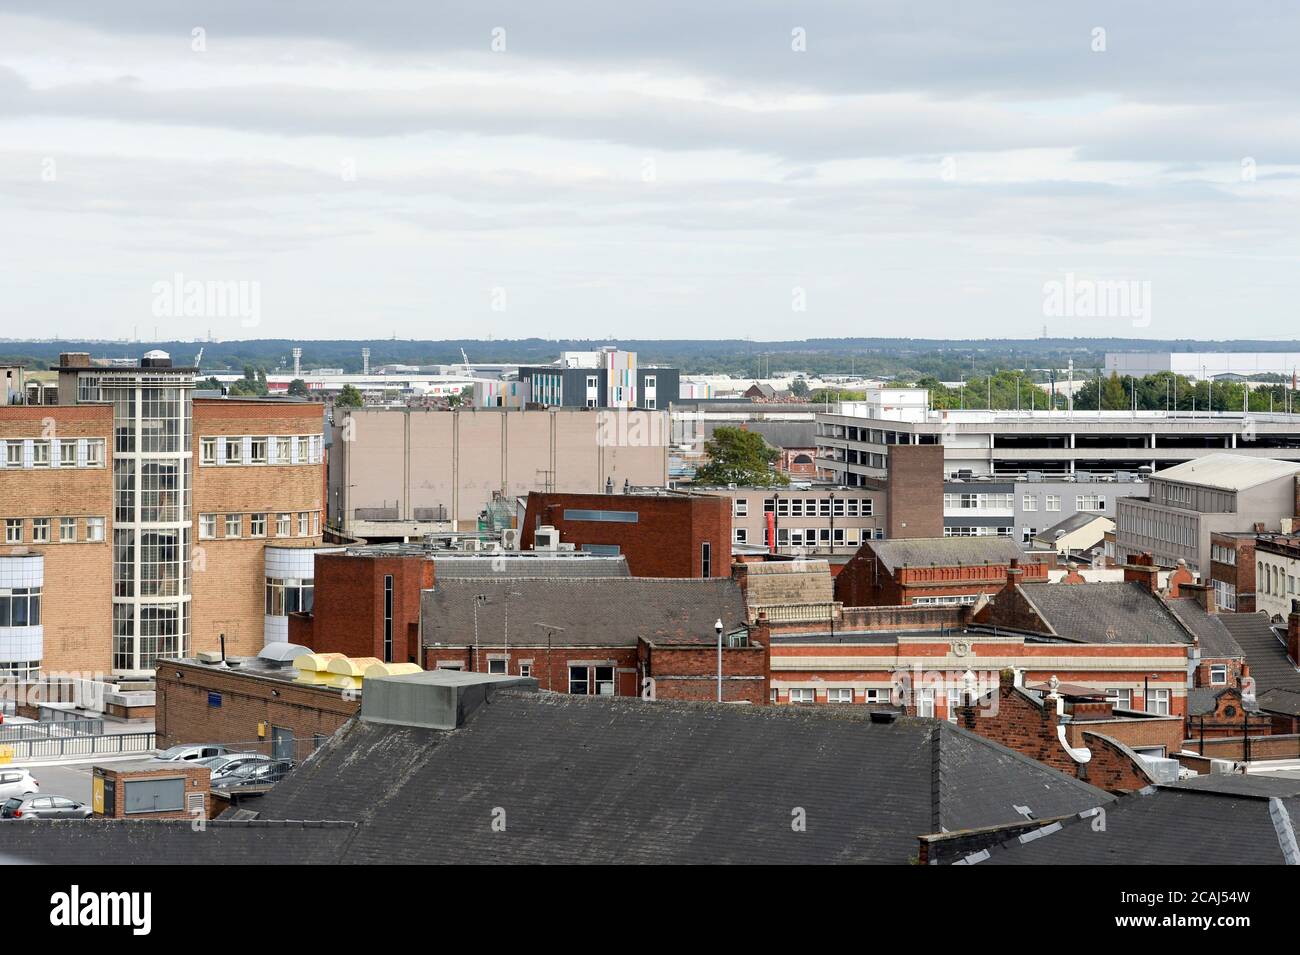 Views across Doncaster from above Stock Photo